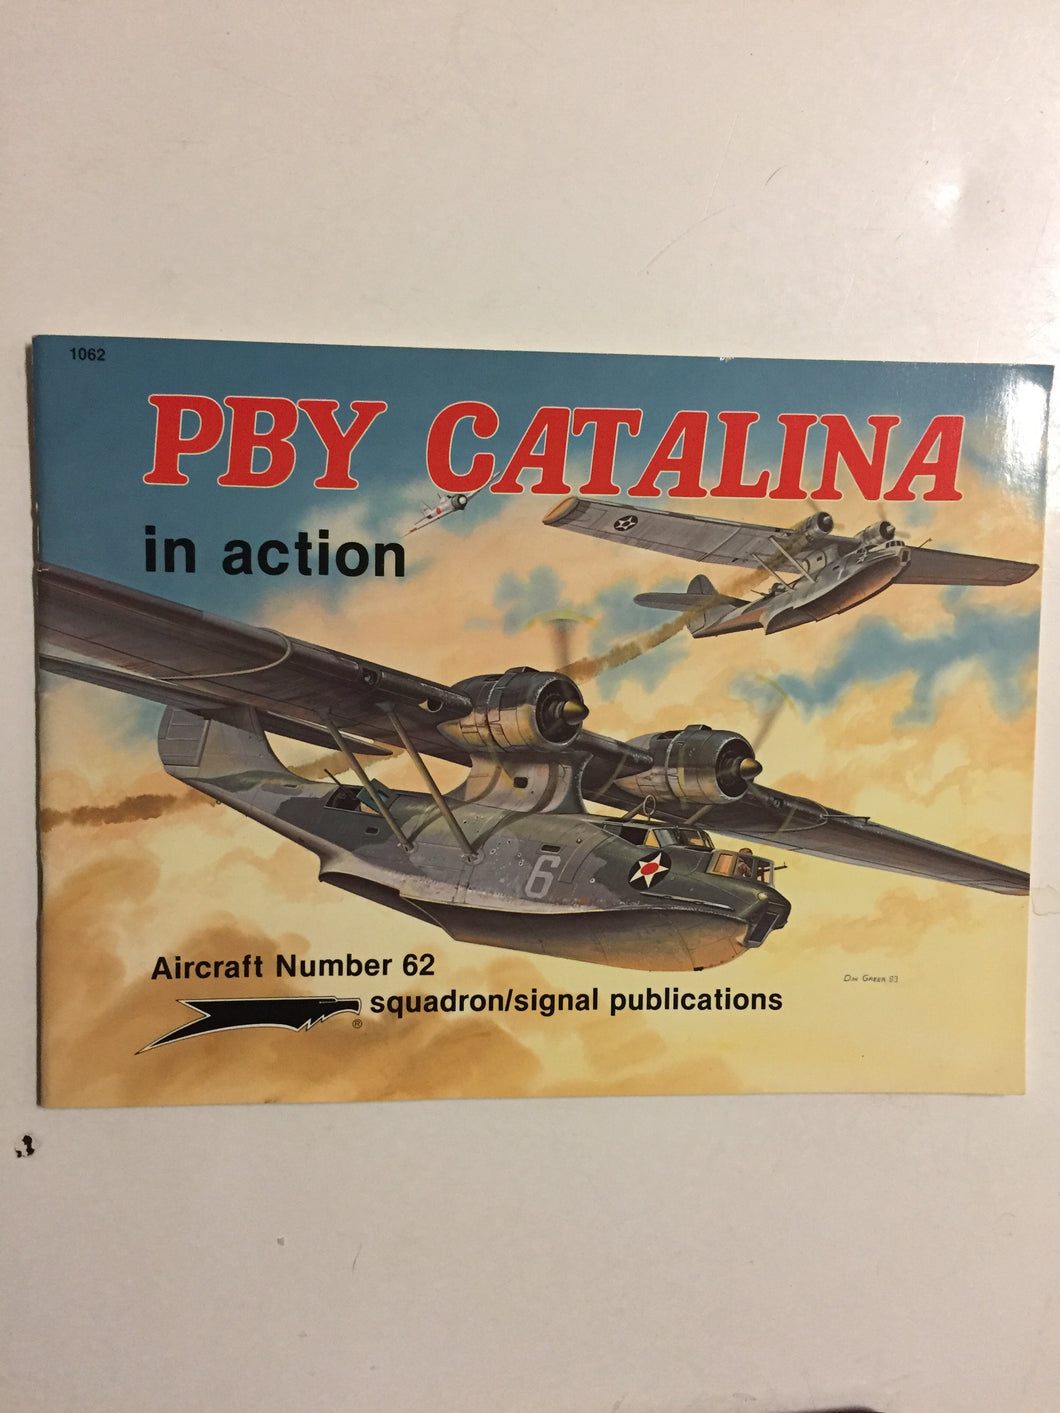 PBY Catalina in Action- Slick Cat Books 